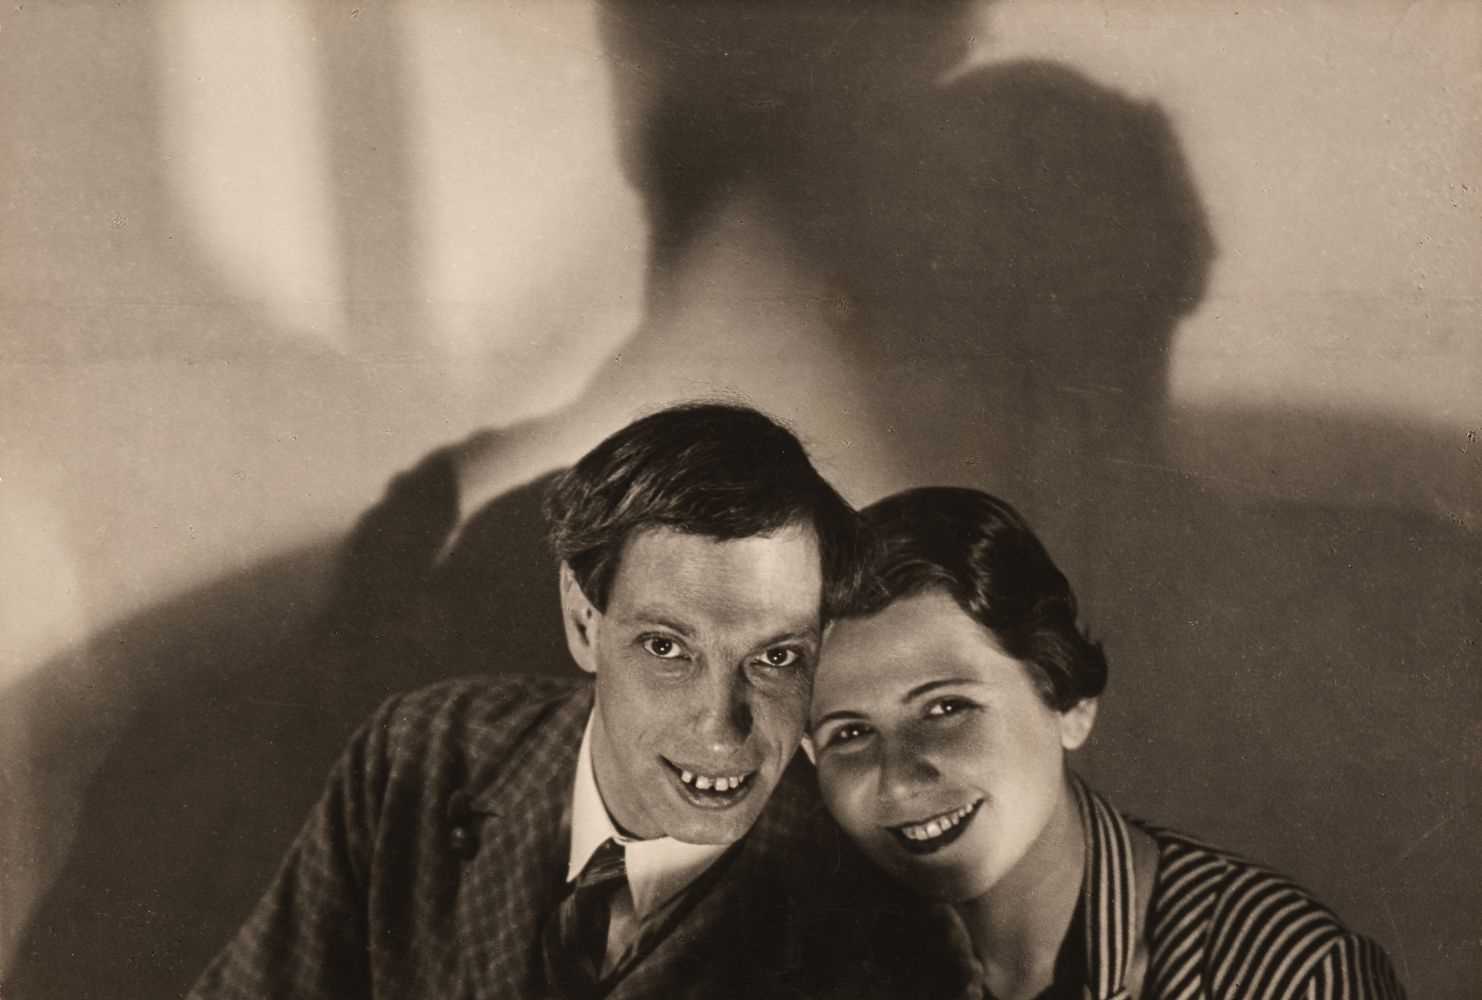 Lot 190 - Pesci (Joseph, 1889-1956). Self portrait of the photographer with his wife, Hungary, 1935